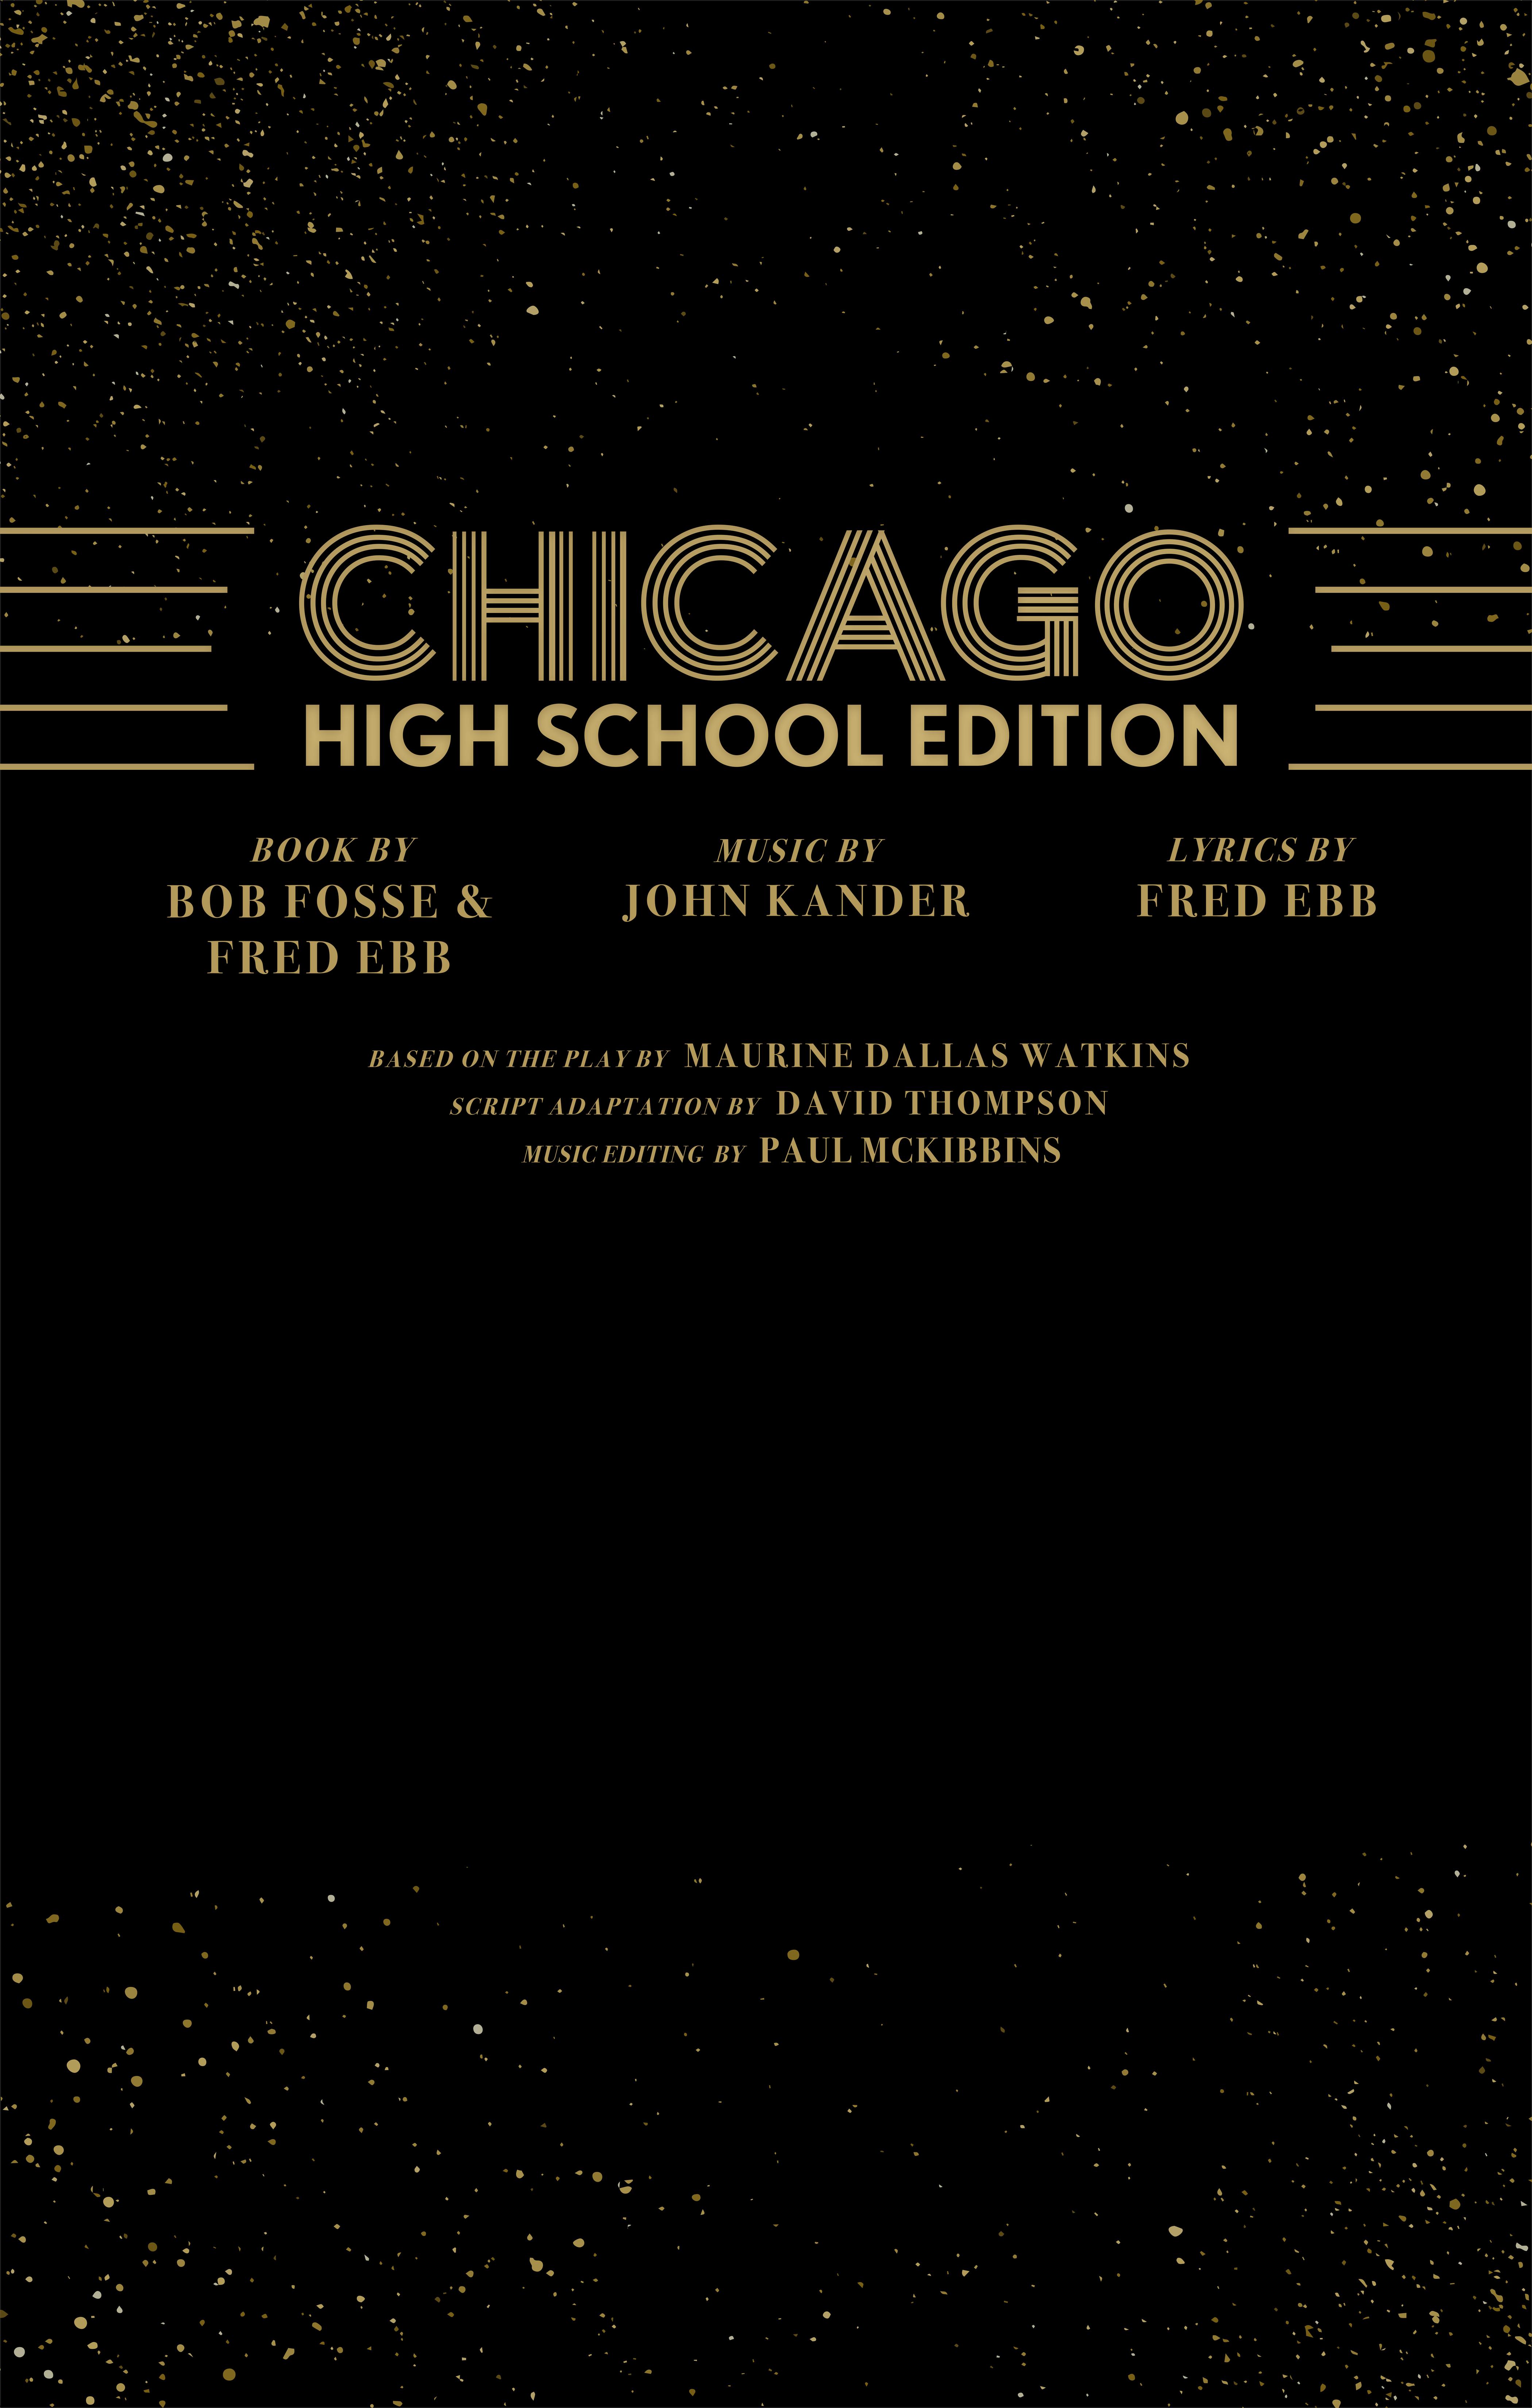 The poster for Chicago: High School Edition